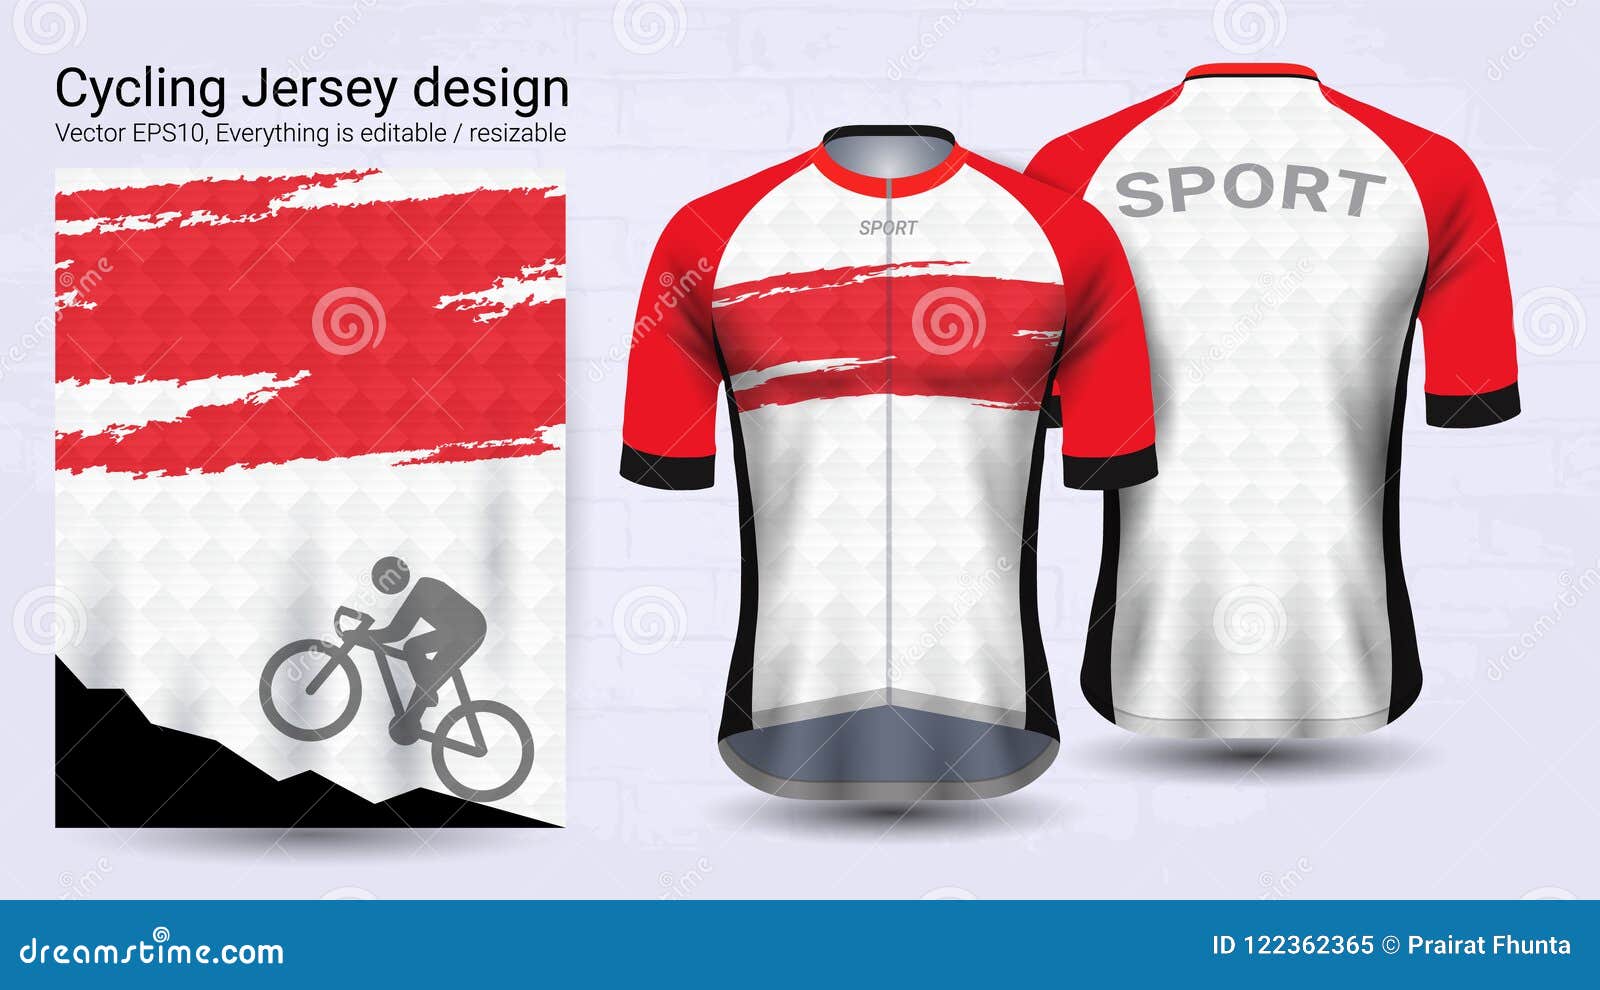 Download Cycling Jerseys Short Sleeve Sport Mockup Template Graphic Design For Bicycle Apparel Or Clothing Outerwear And Raingear Uniform Stock Vector Illustration Of Orange Elements 122362365